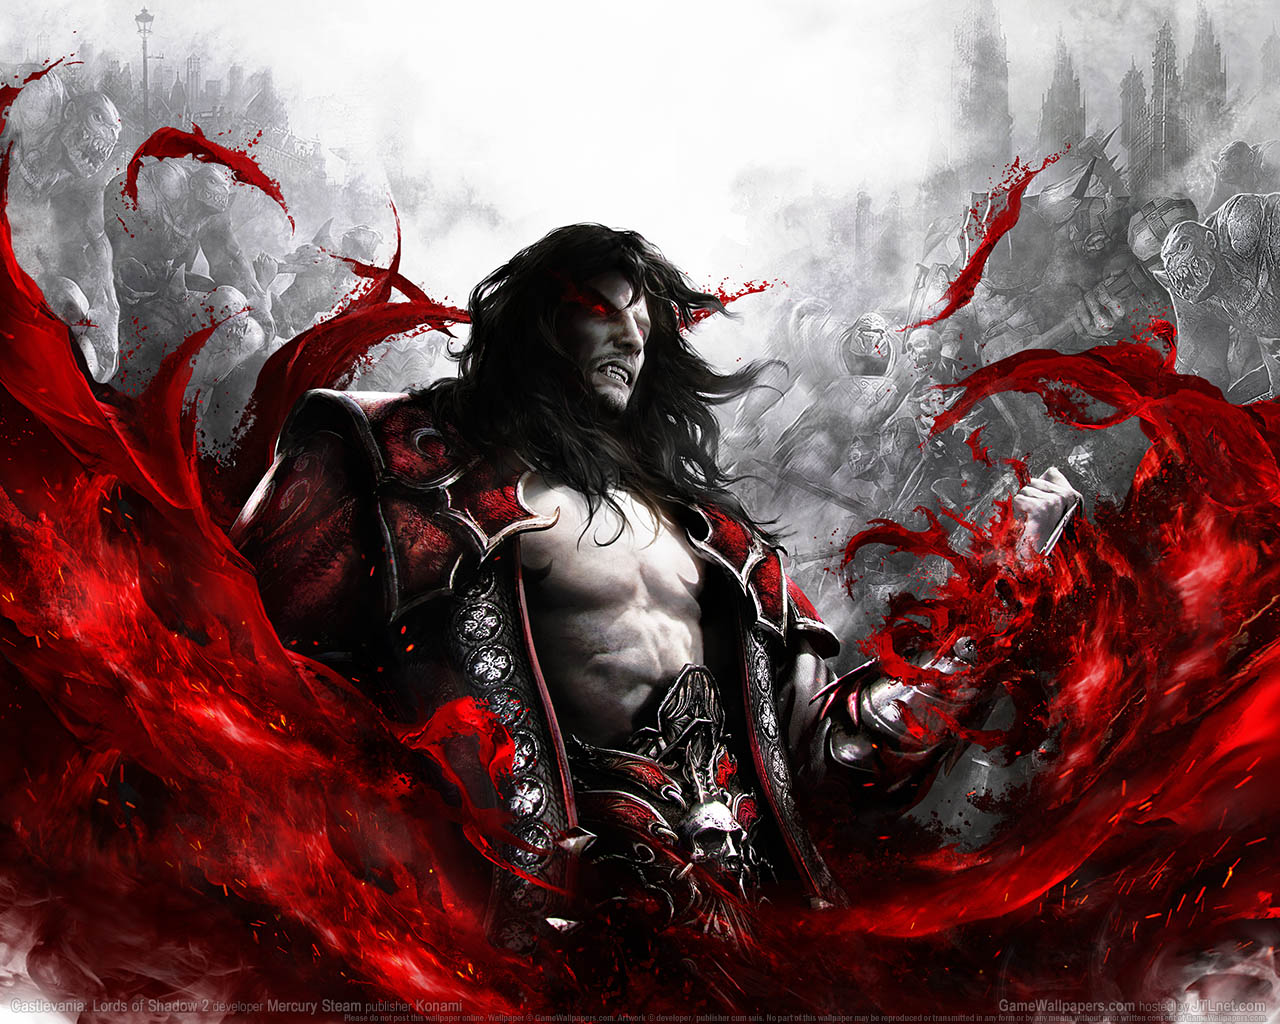 Castlevania%3A Lords of Shadow 2 wallpaper 03 1280x1024